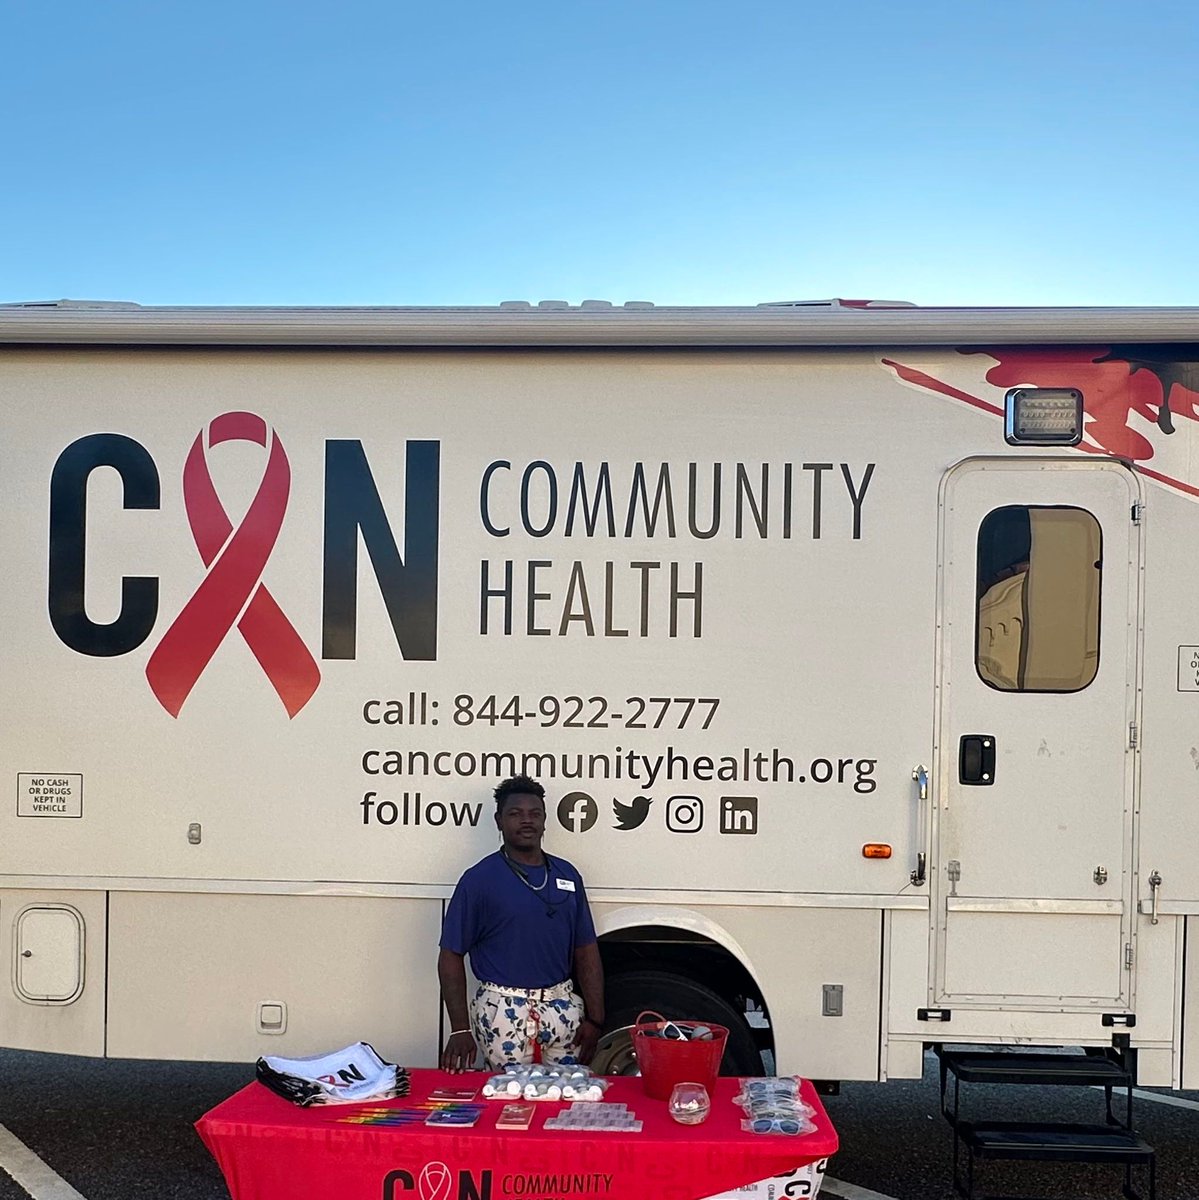 JACKSONVILLE, FL: Find the #CANjacksonville team outside our @LSSjax partners at 4615 Philips Hwy in #JacksonivlleFL on Wed, March 6th. We'll offer FREE, rapid #HIV and #HepC testing, plus linkage to #HIVcare, #RyanWhite and #PrEP services from 9am-3pm.